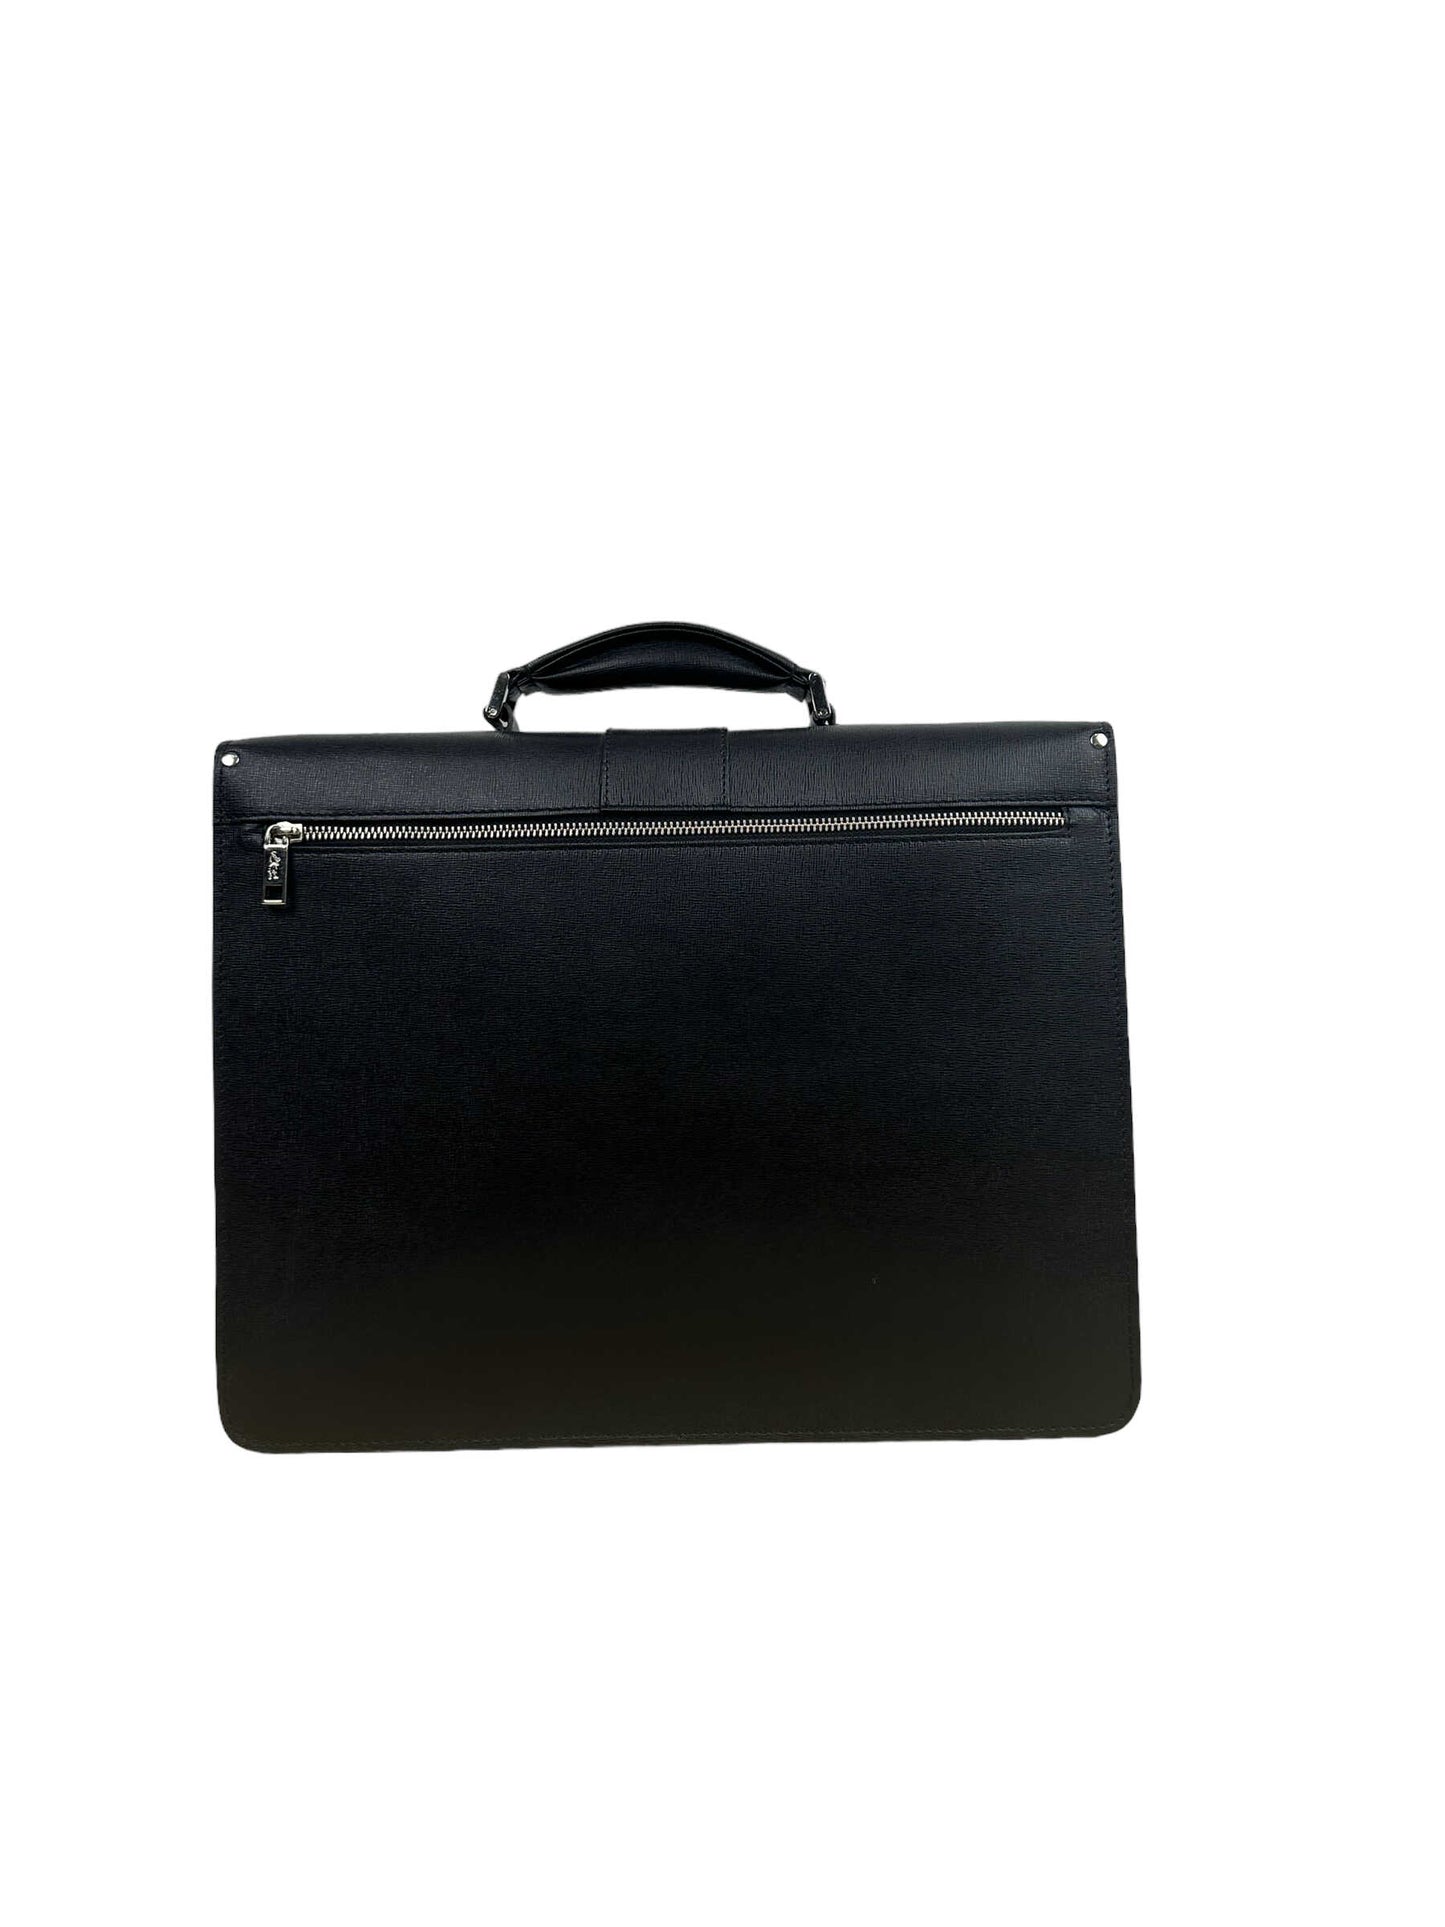 Gianni Conti Black Saffiano Leather Briefcase — Genuine Design Luxury Consignment for Men. New & Pre-Owned Clothing, Shoes, & Accessories. Calgary, Canada